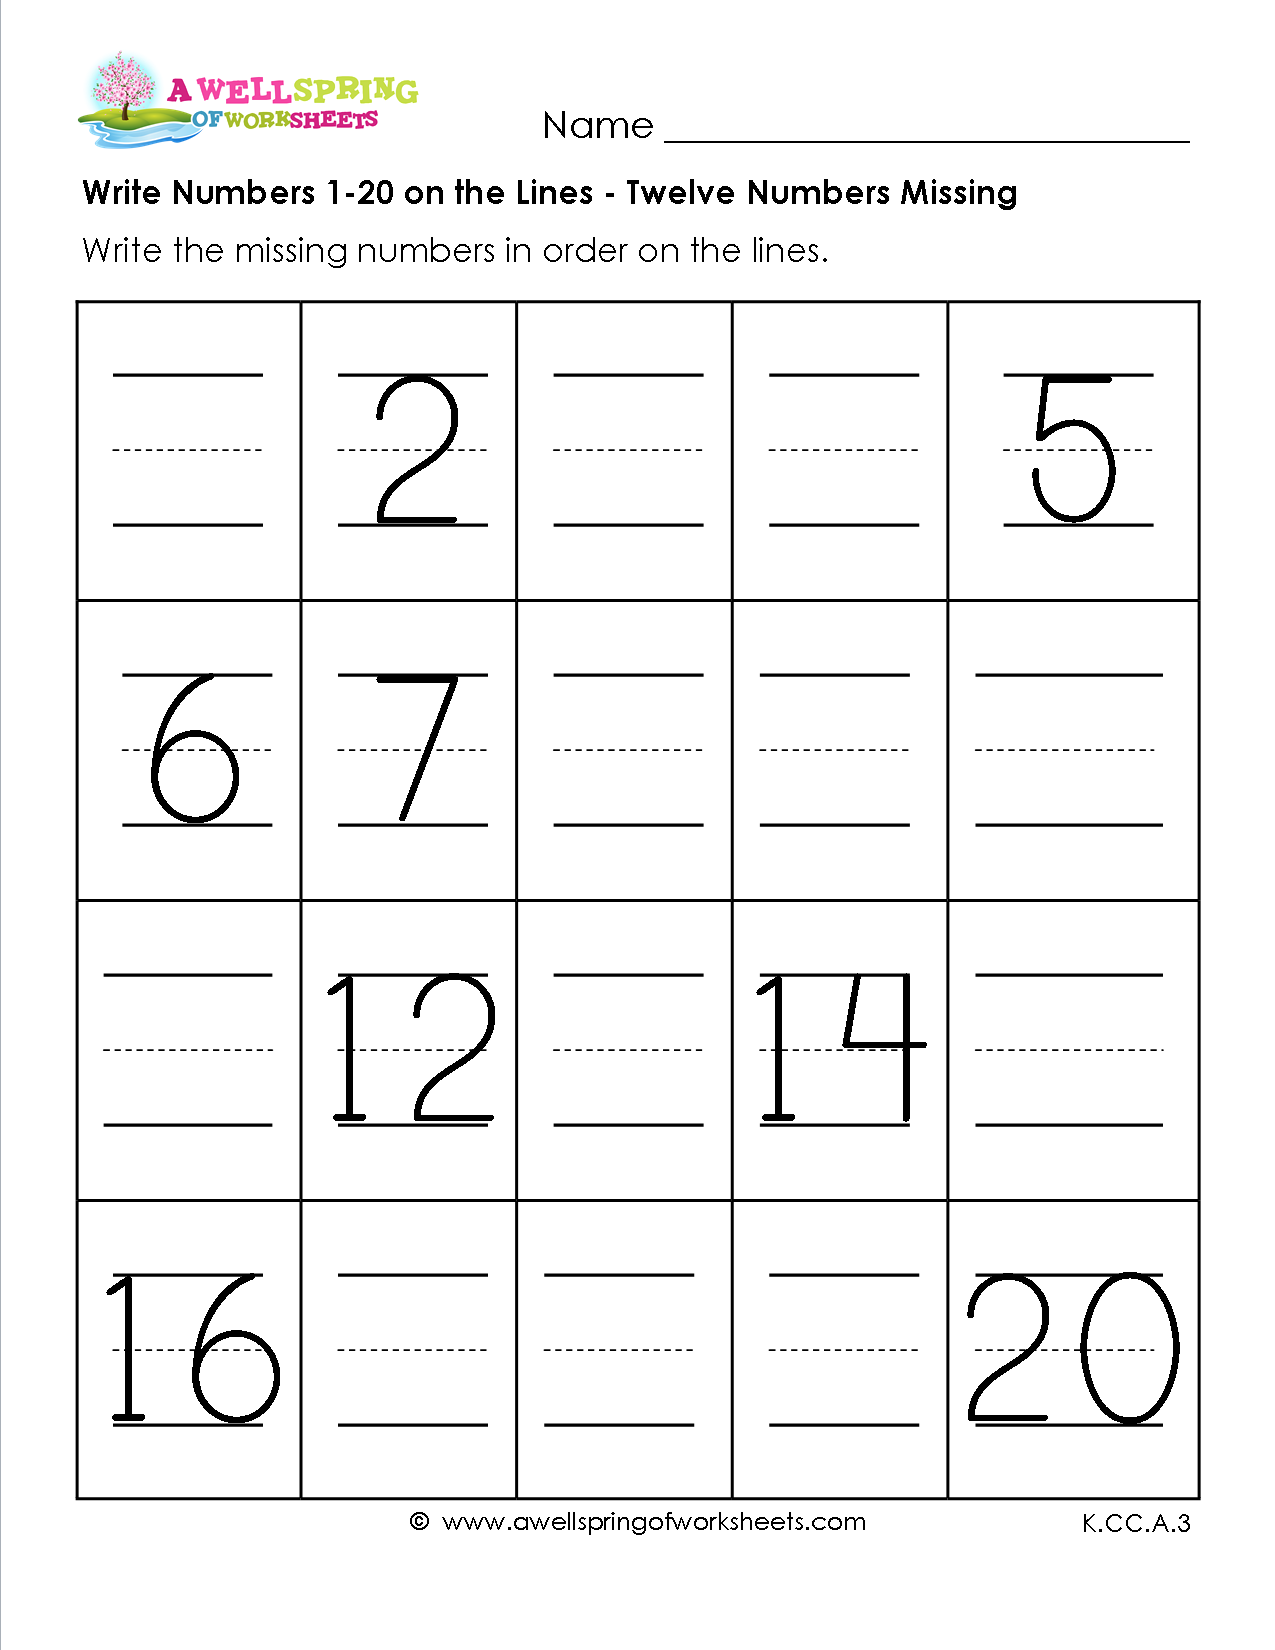 Grade Level Worksheets A Wellspring Of Worksheets Writing Numbers 1 